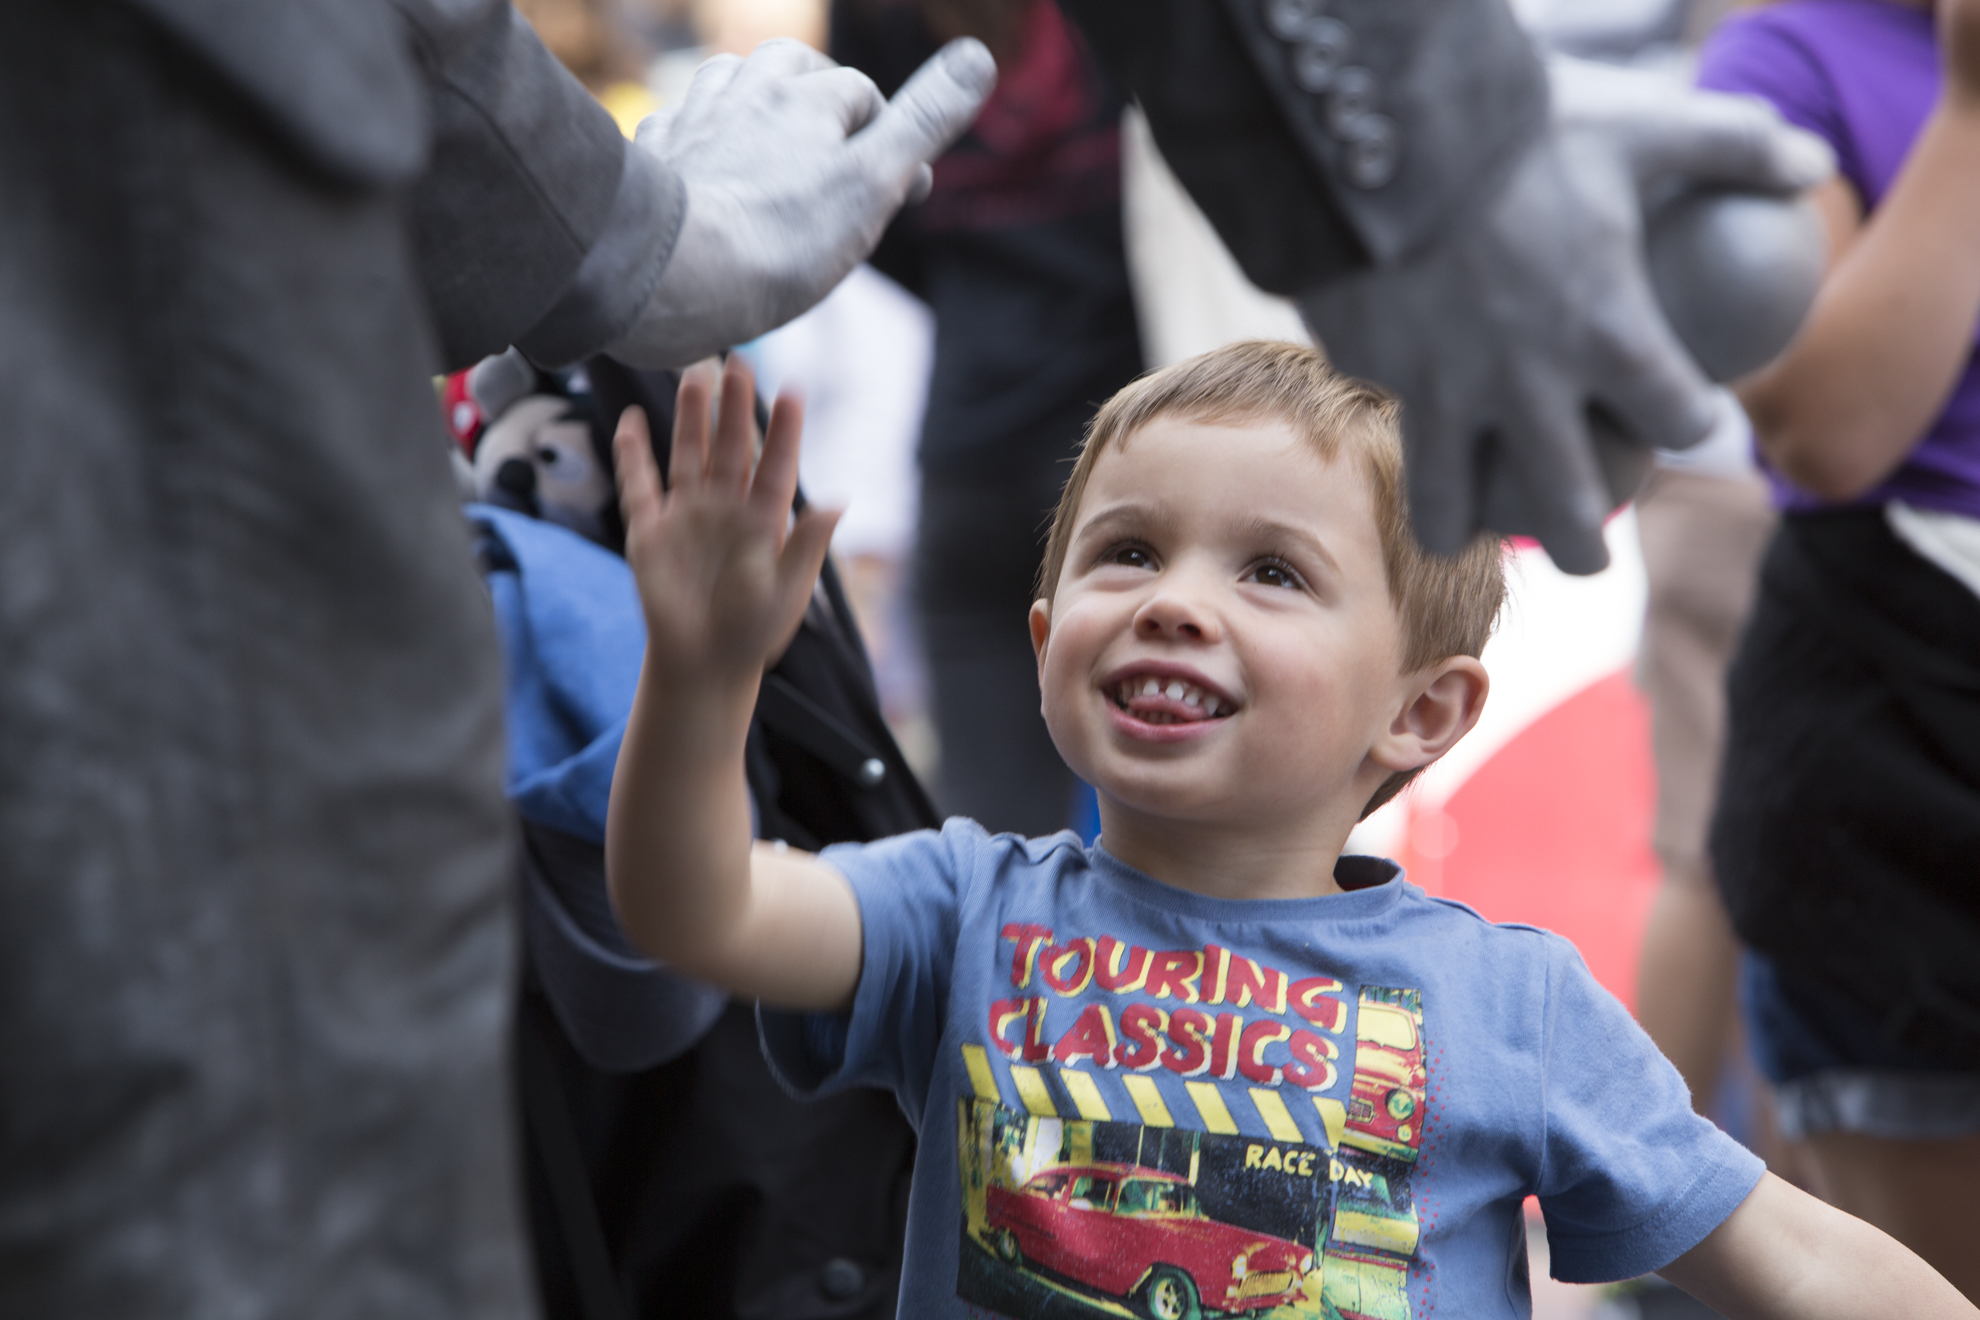  Ollie Bathgate, 2, from Edinburgh, give a high five to John Godbolt in front of St. Giles Cathedral on the Royal Mile during the 2014 Edinburgh Festival of the Fringe in Edinburgh, Scotland.    